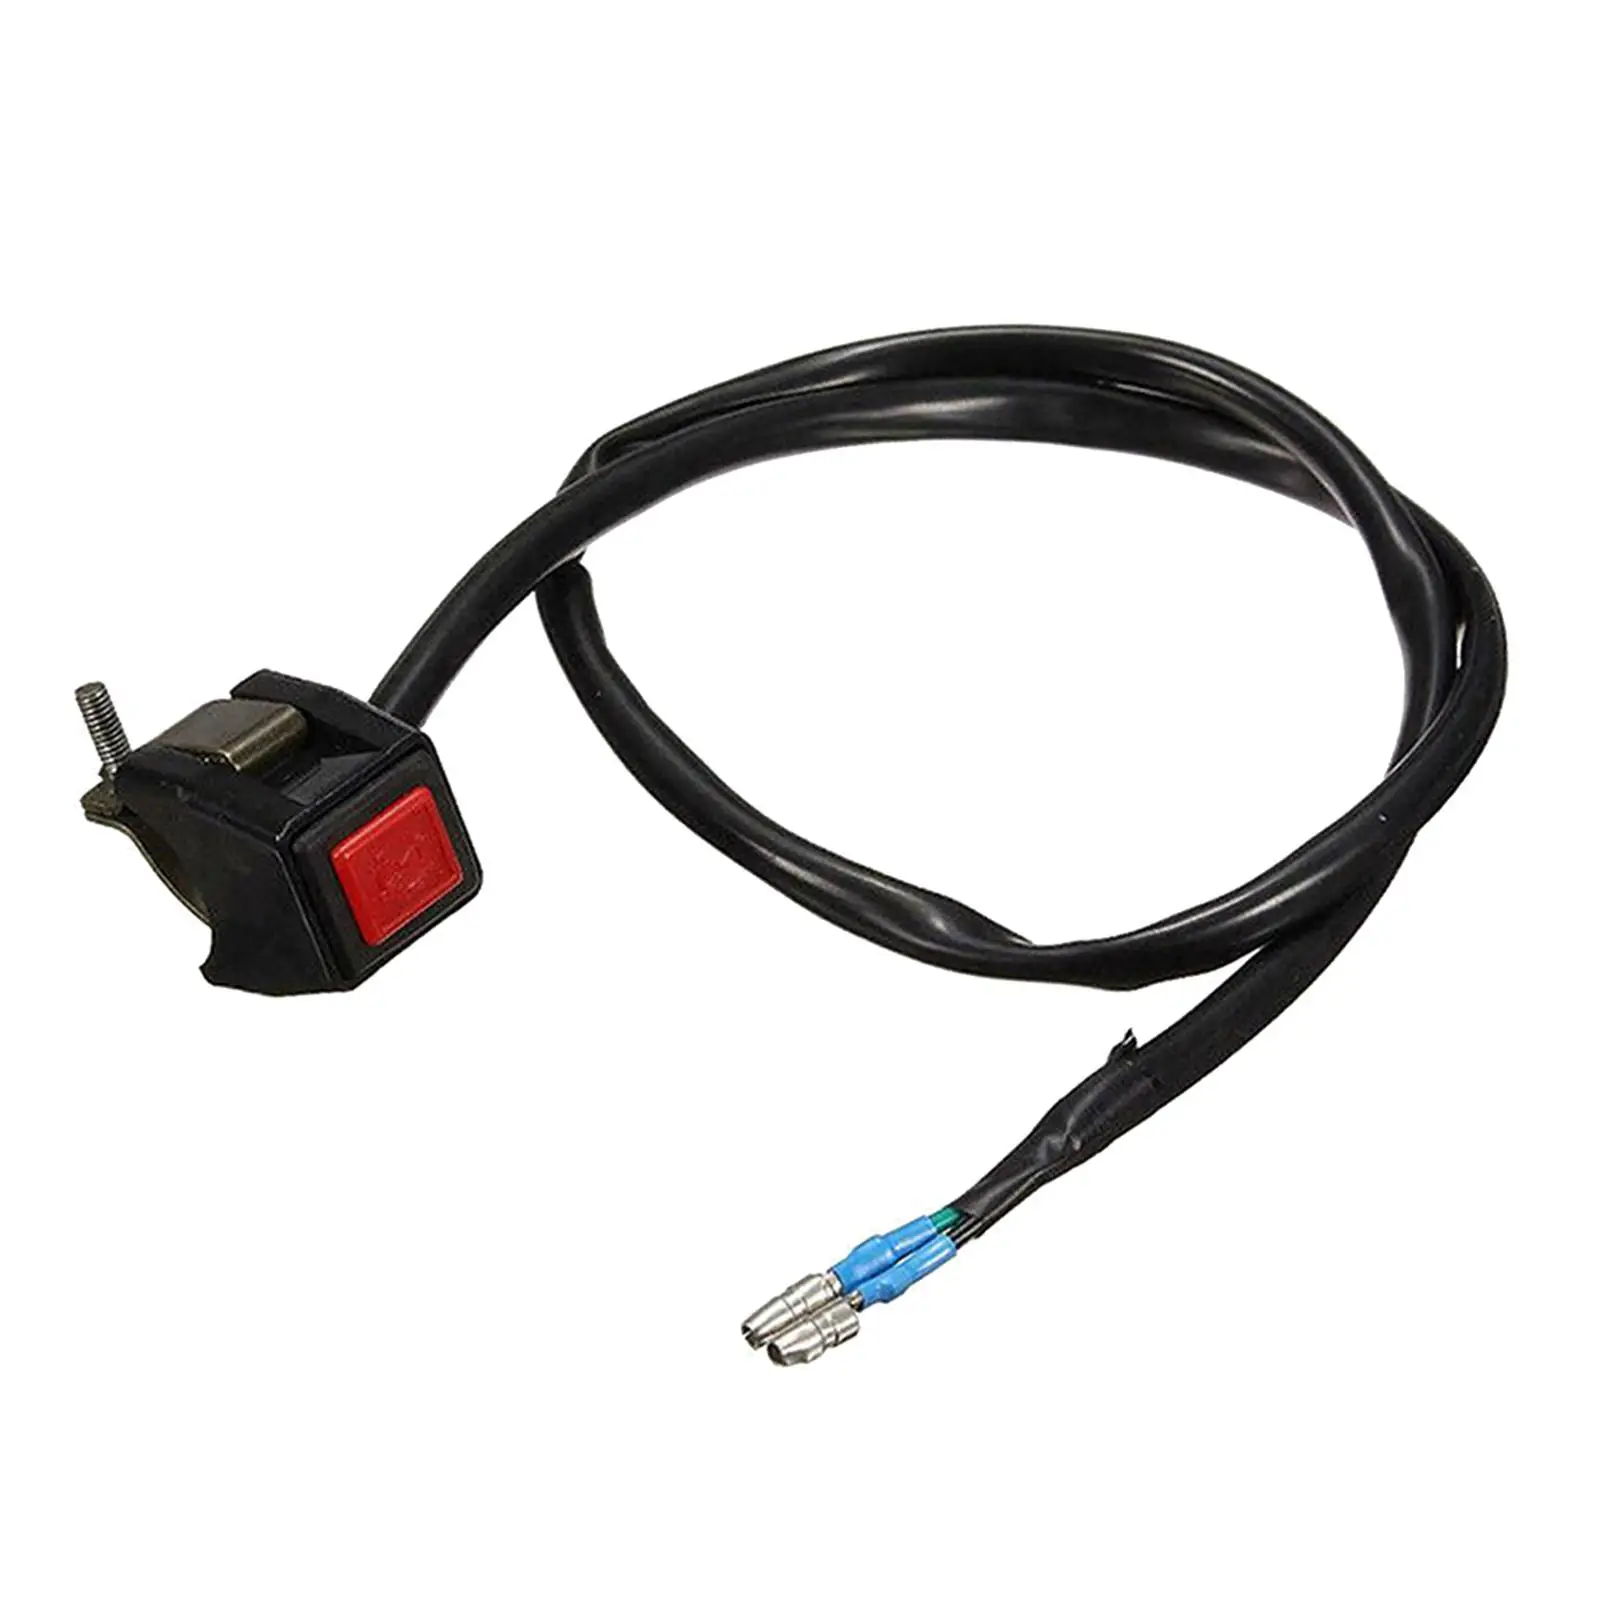 Motorcycle Handlebar Horn Switch Handlebar Mounted Replaces Professional Accessories Easy to Install Durable Universal Portable